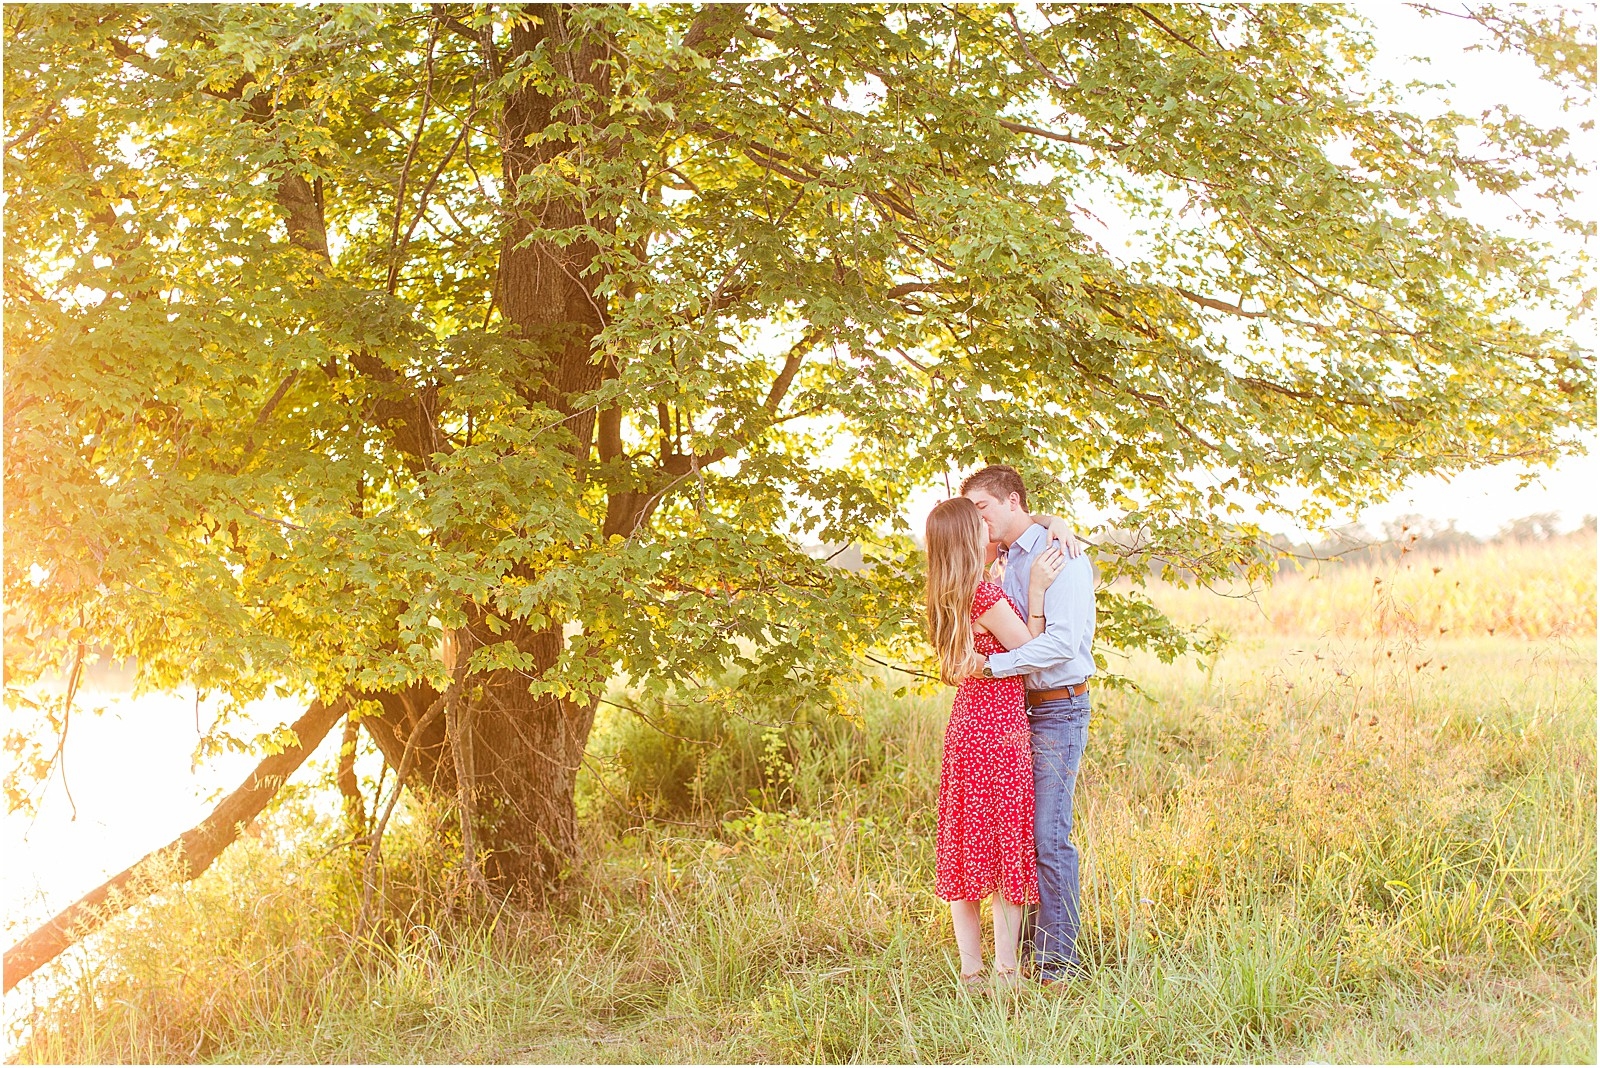 A Jasper Indiana Engagement Session | Tori and Kyle | Bret and Brandie Photography041.jpg